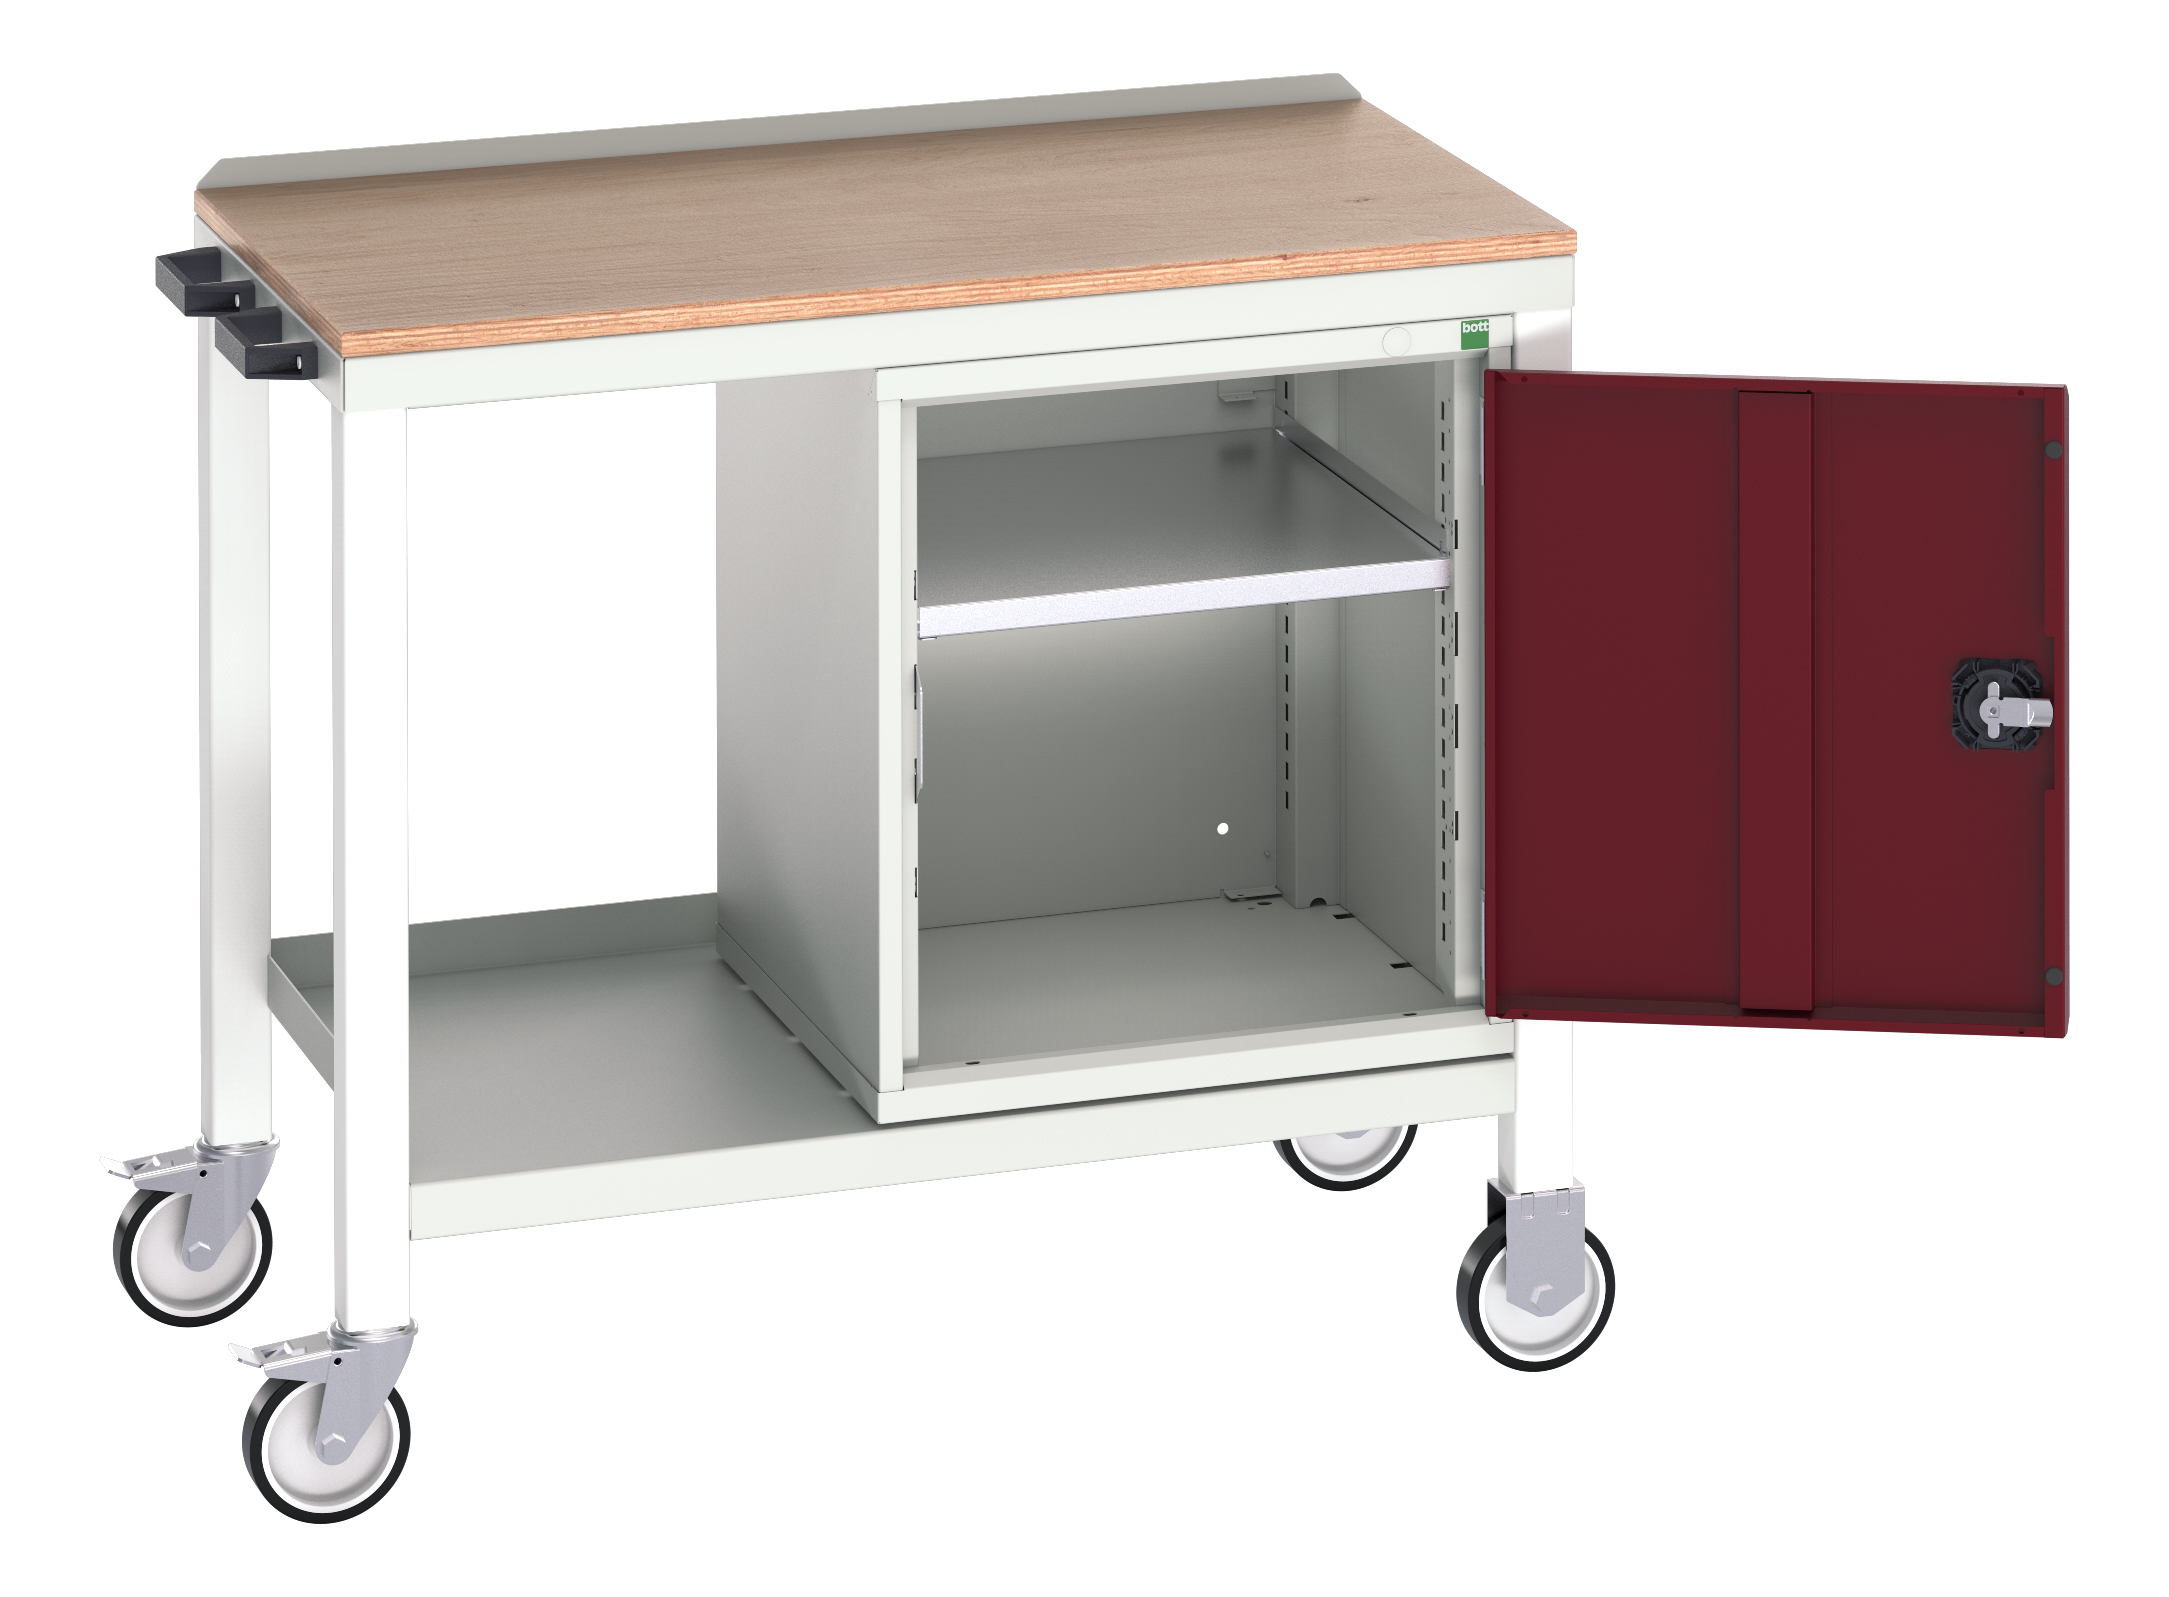 Bott Verso Mobile Welded Bench With Full Cupboard - 16922803.24